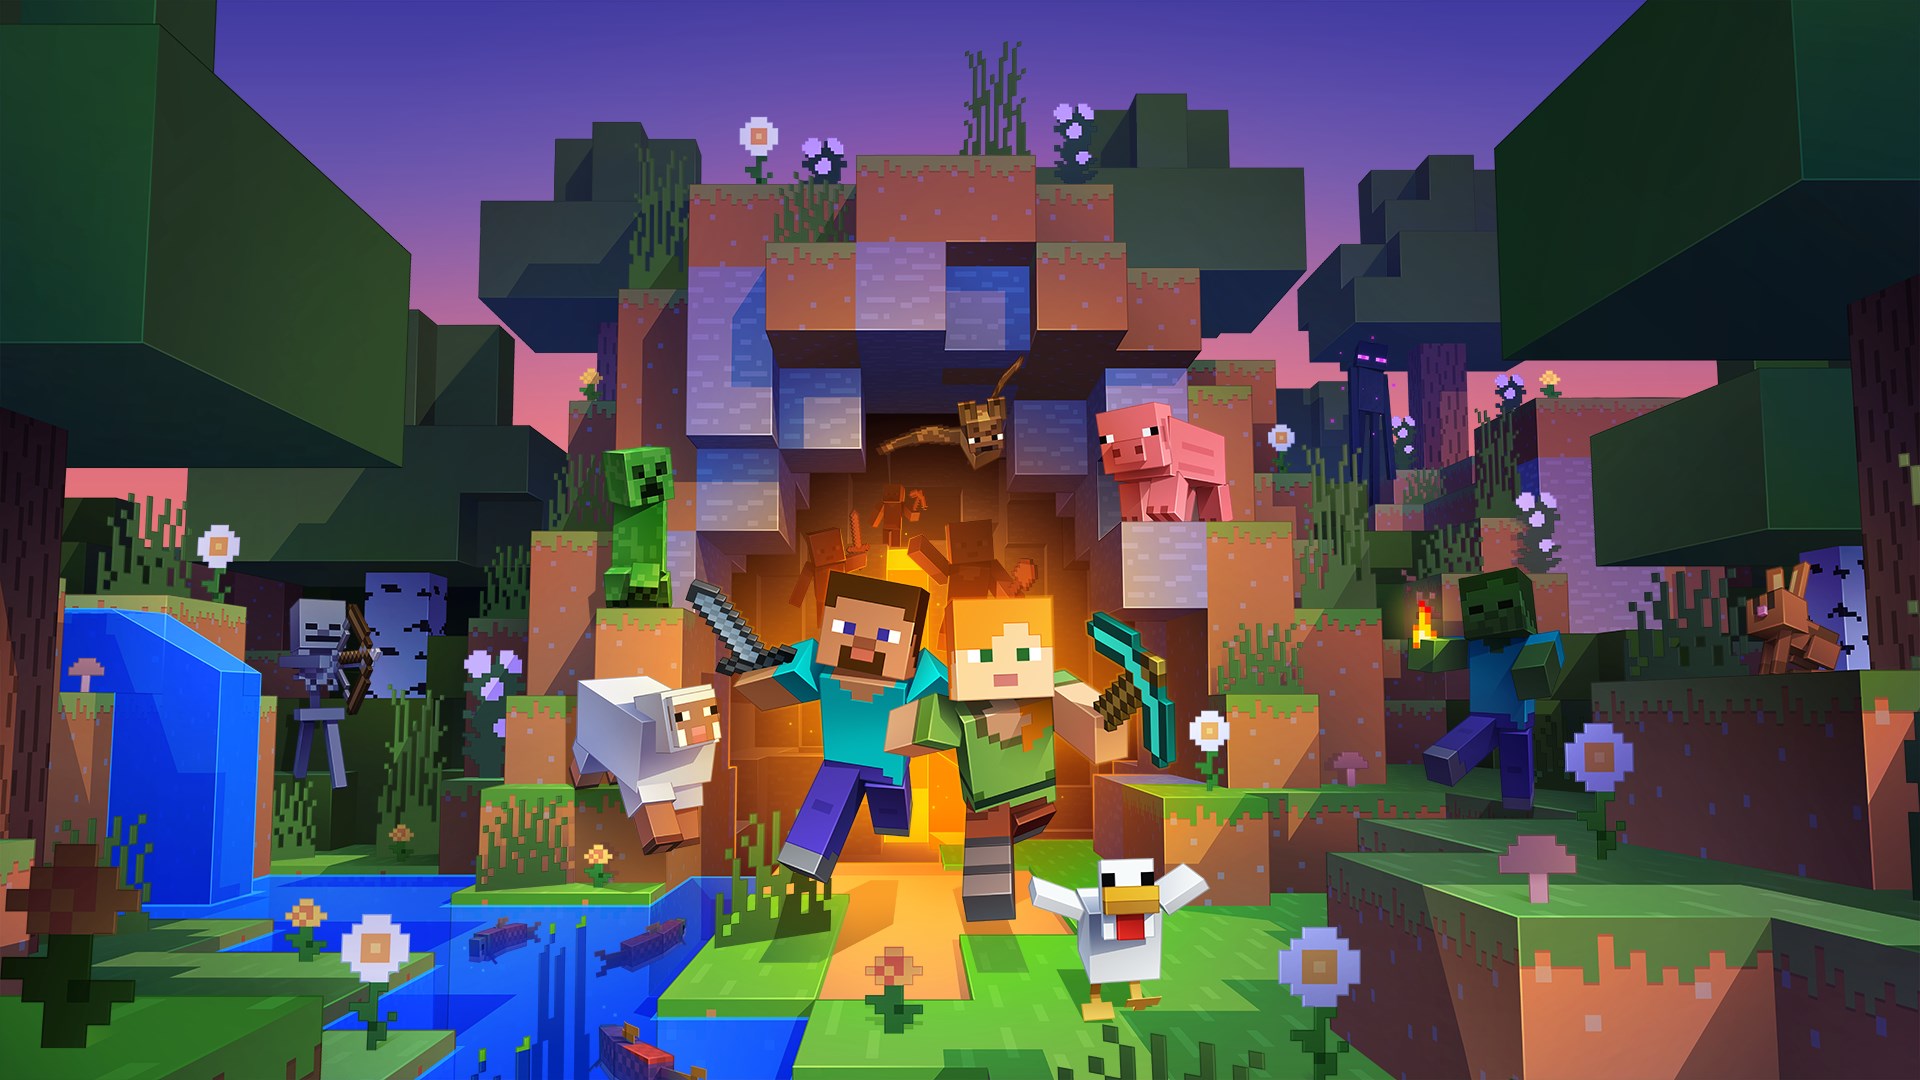 Minecraft Bedrock Edition Update Introduces Exciting New Mob and Items